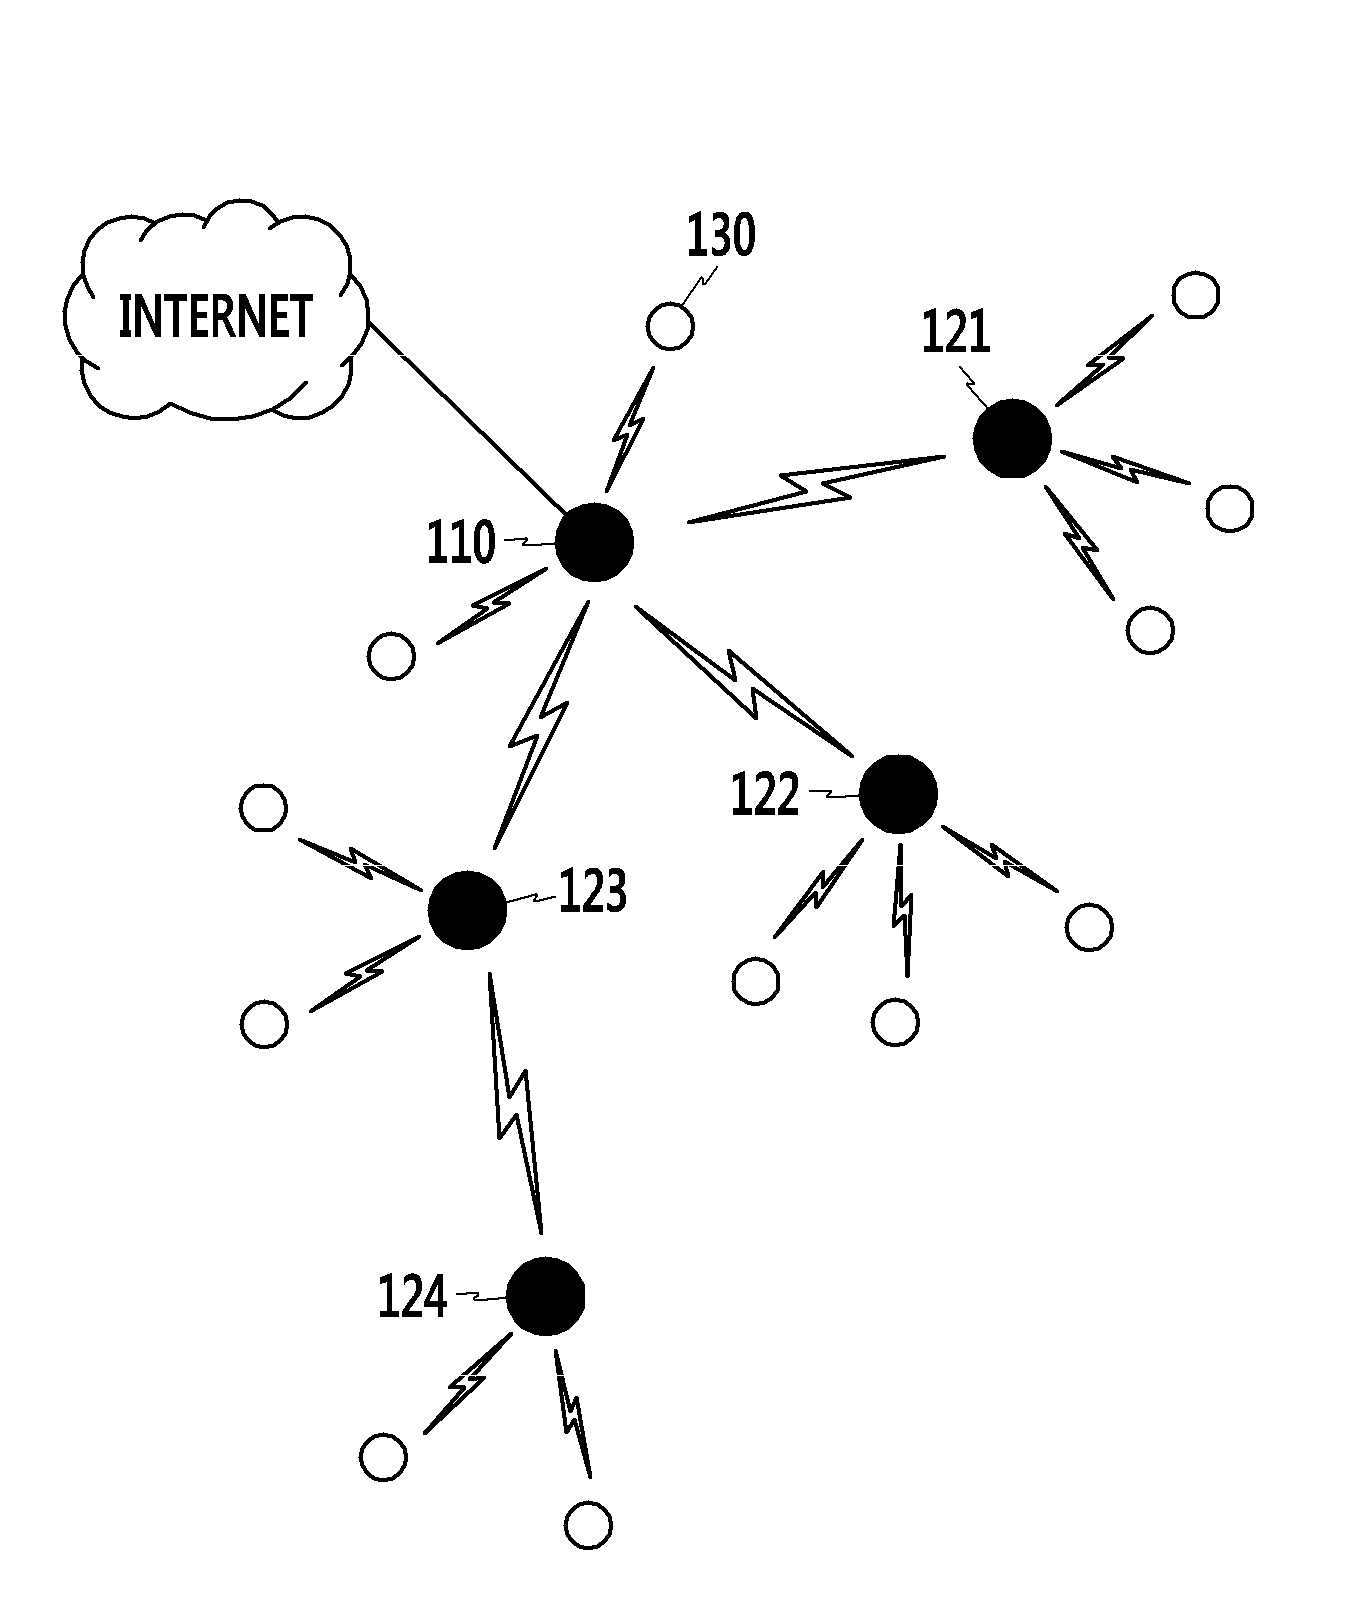 Method of generating networks by utilizing multi-channel